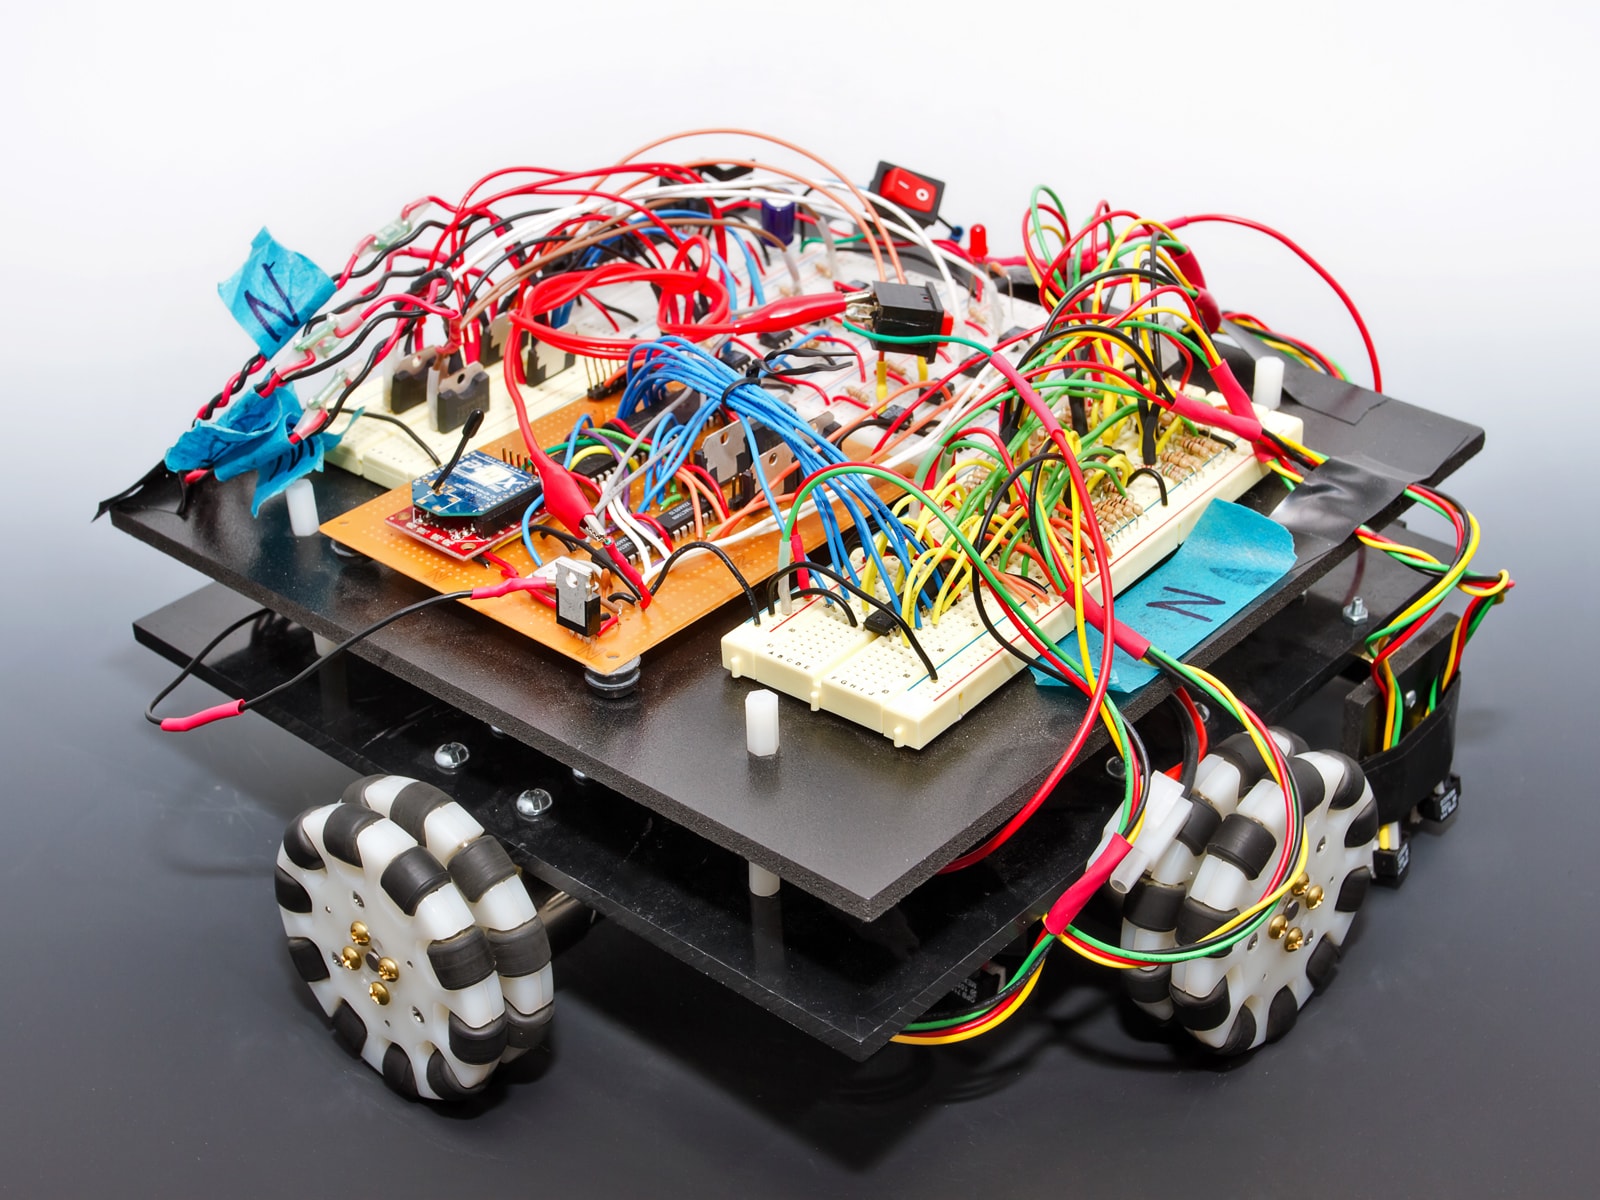 A square robot with exposed circuitry and black and white wheels.